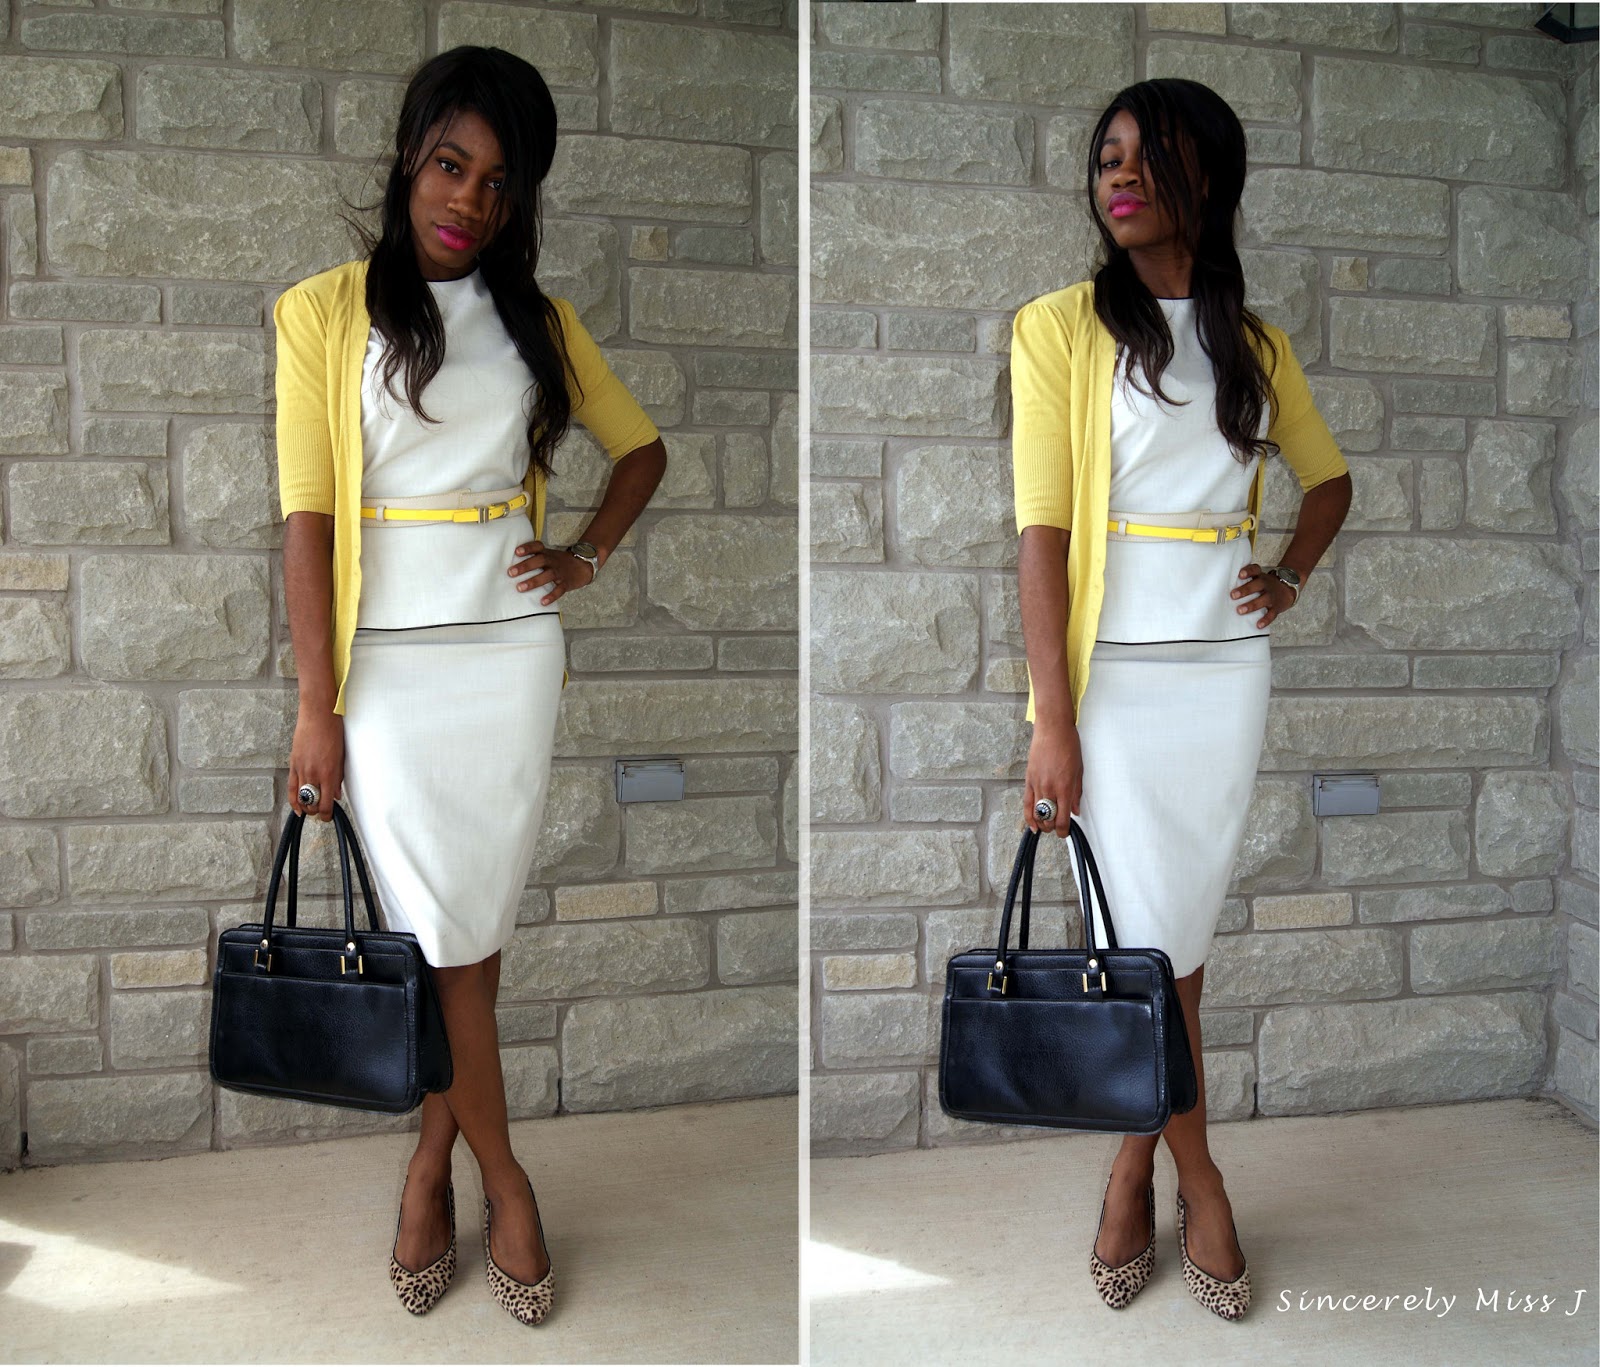 Beautiful outfit from Toronto style blogger Cardigan & Belt: Dynamite, Dress: Zara, Bag & Heels: thrifted